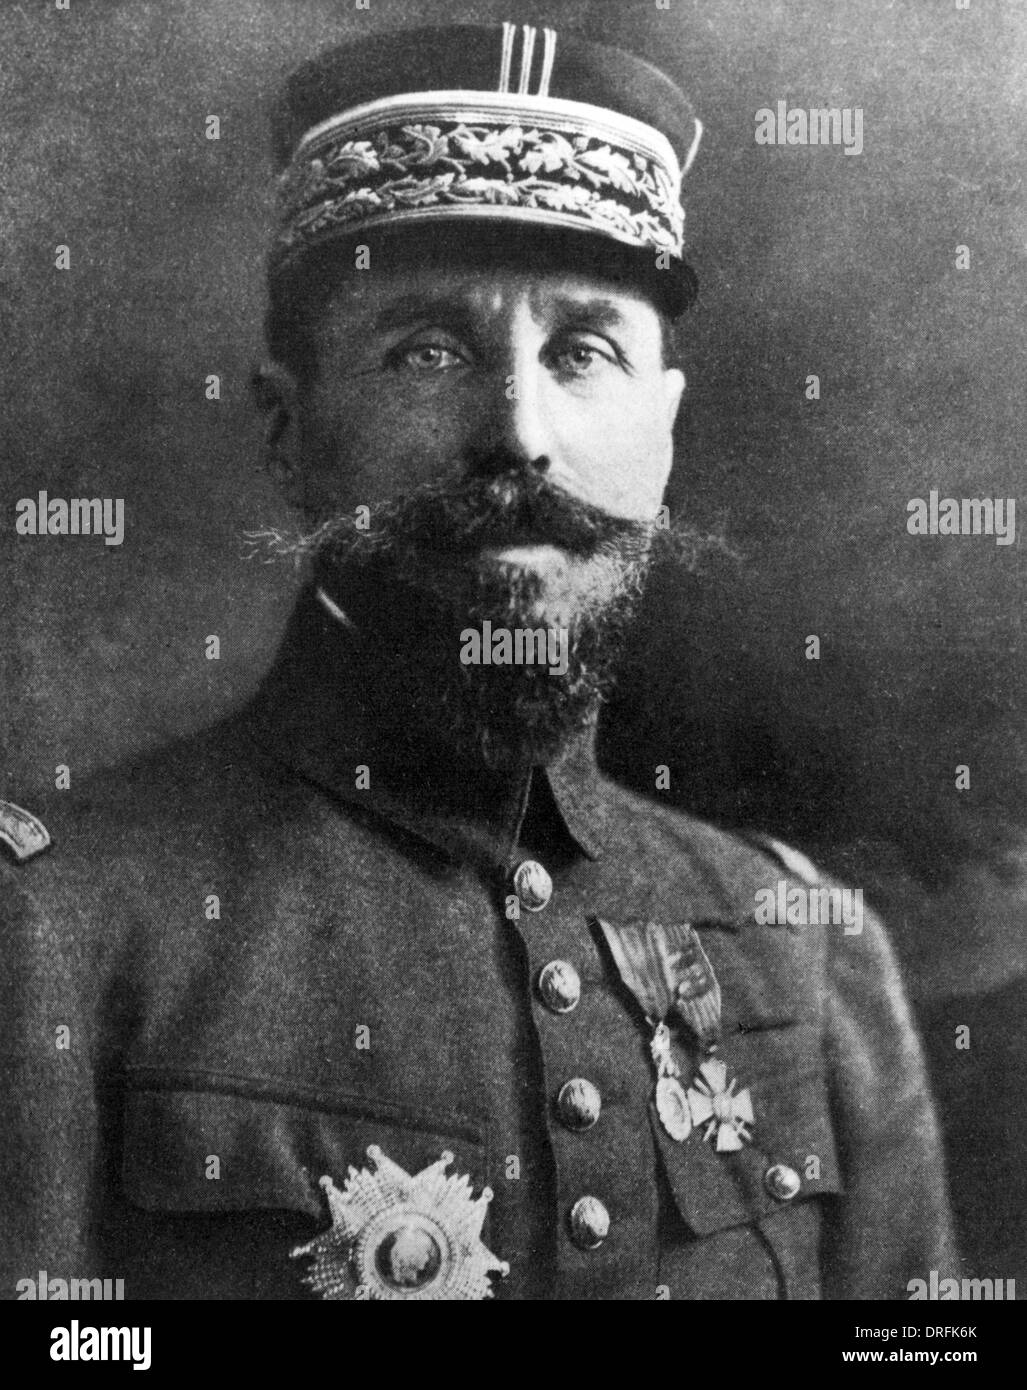 General Gouraud, French Army commander Stock Photo